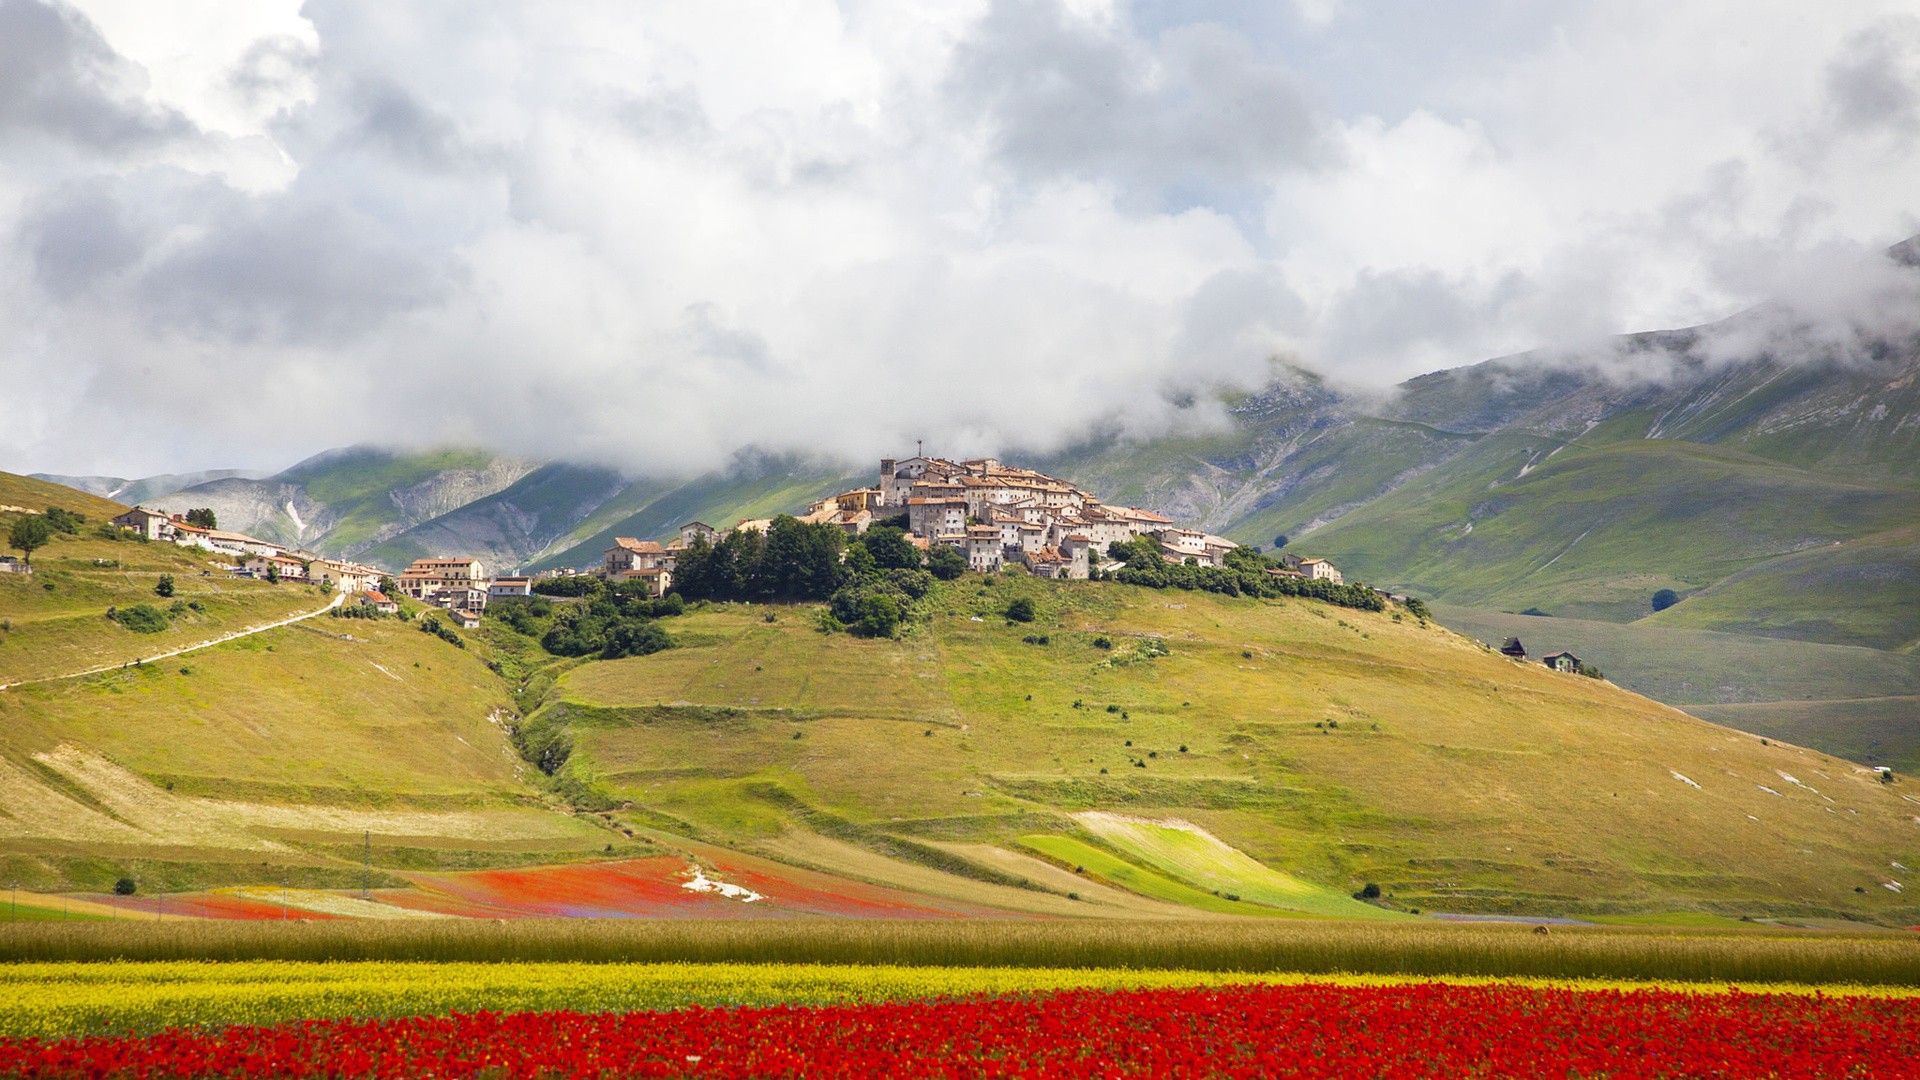 General 1920x1080 landscape nature architecture clouds Italy building house village hills field trees red flowers mountains mist